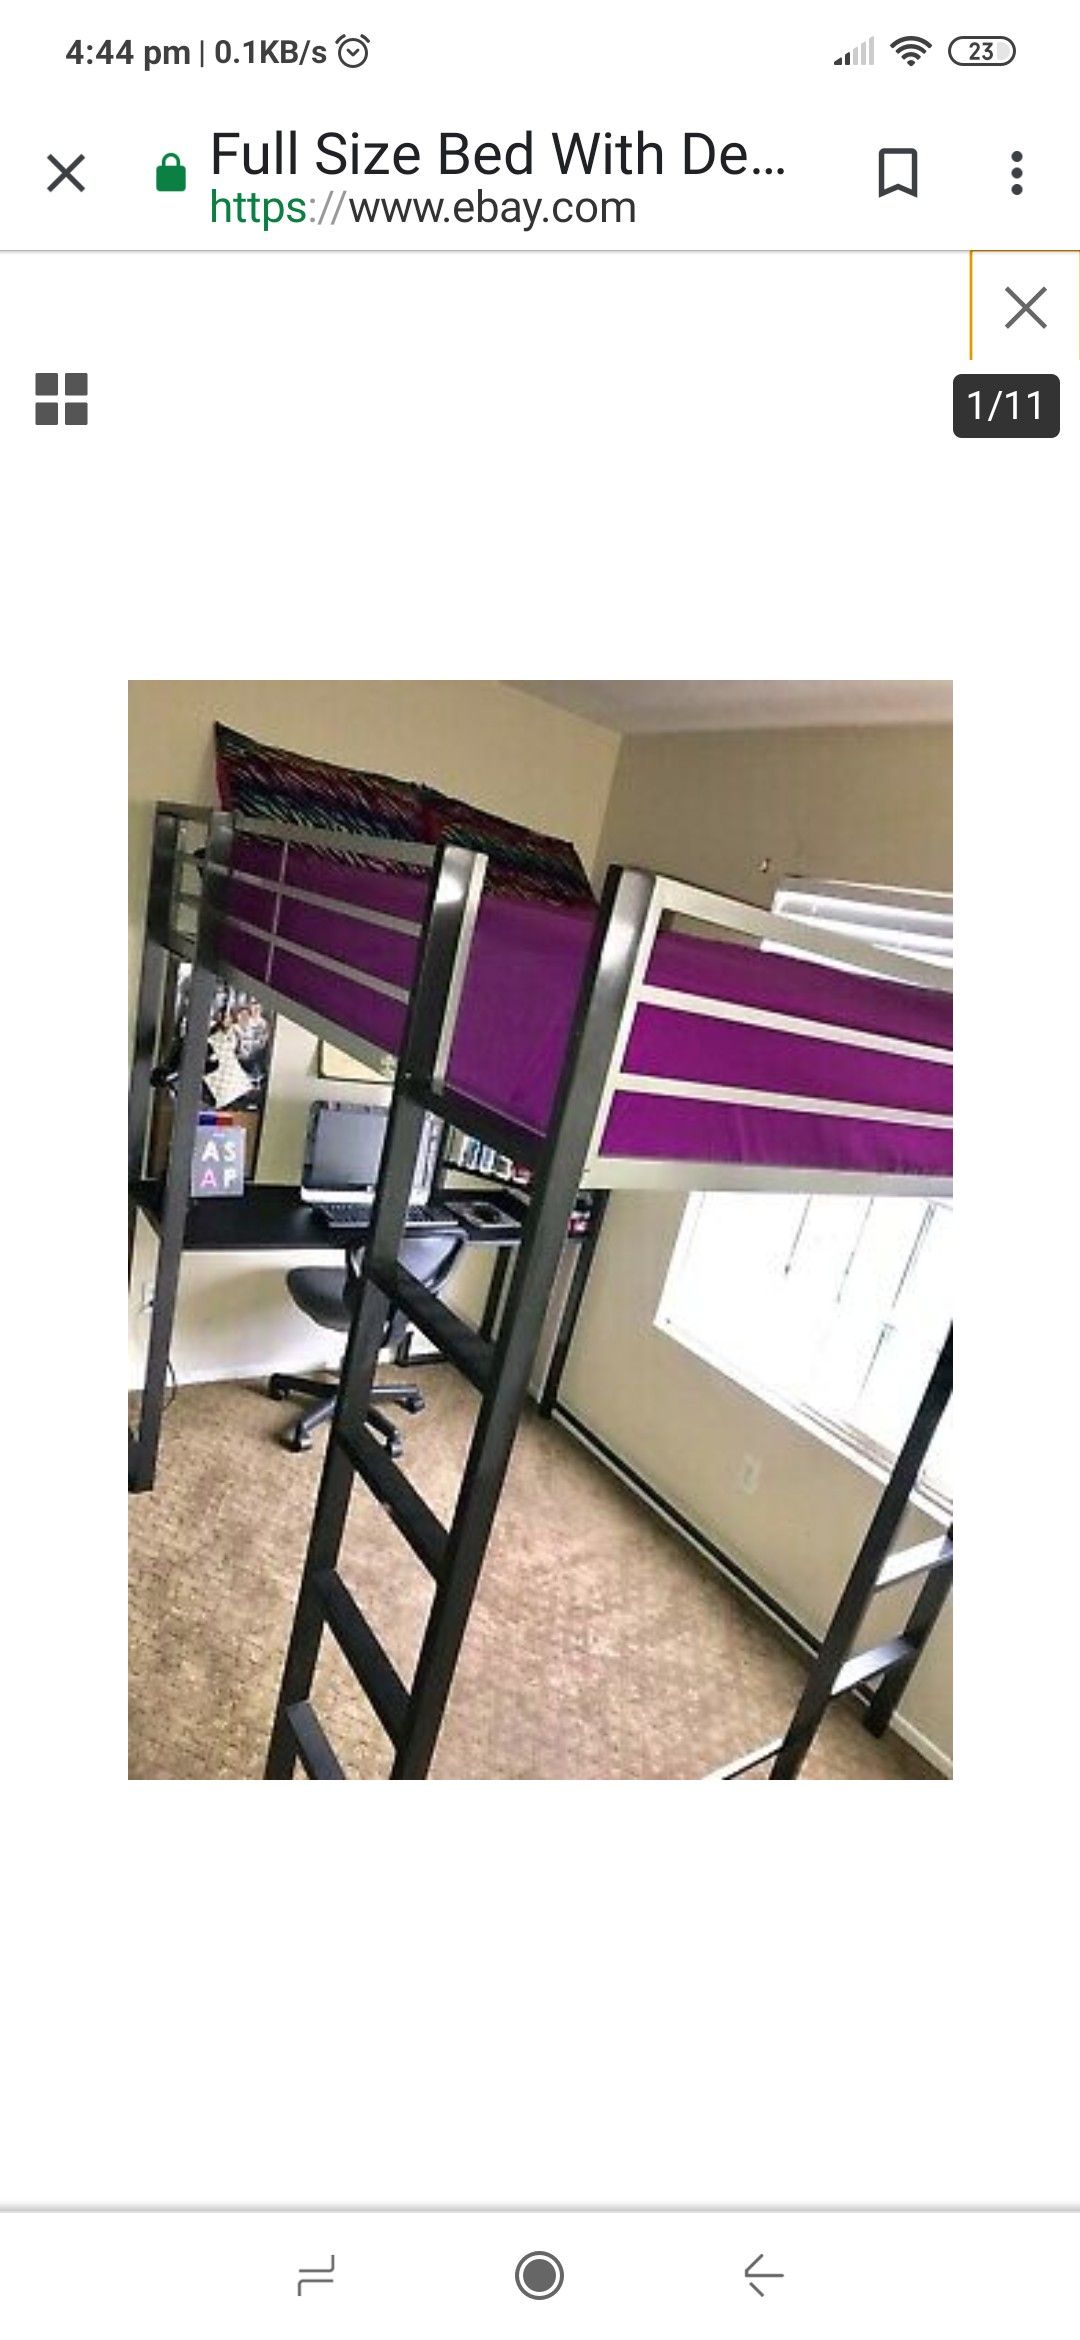 Full bunk bed with desk